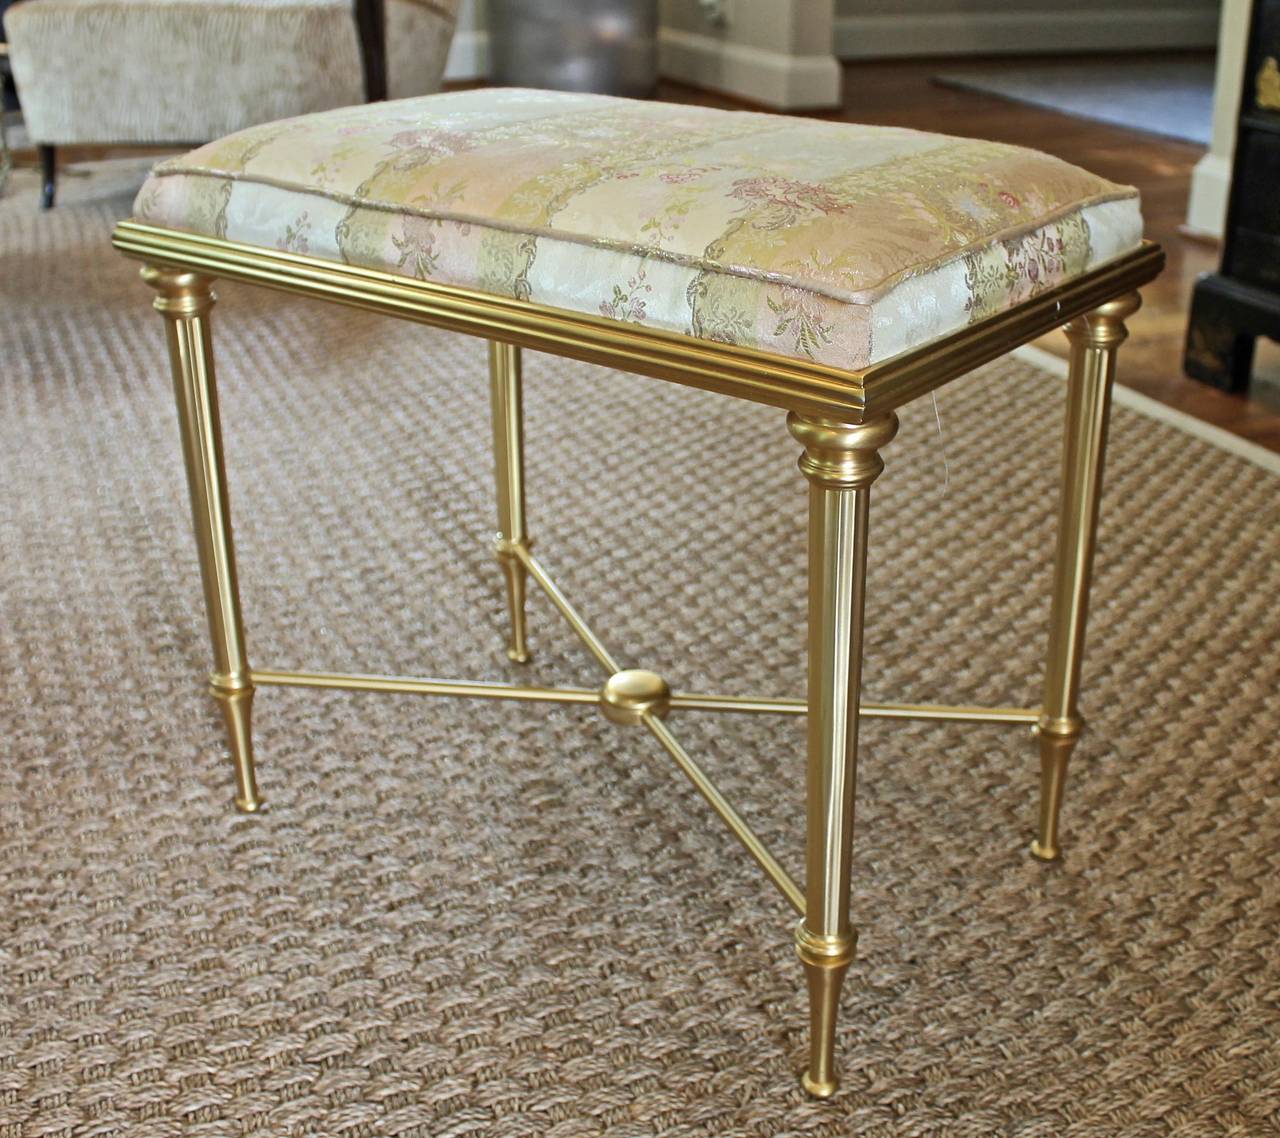 French satin gilt brass x-stretcher bench with upholstered silk lisere cushion top. High quality smaller scale bench with solid sturdy construction.